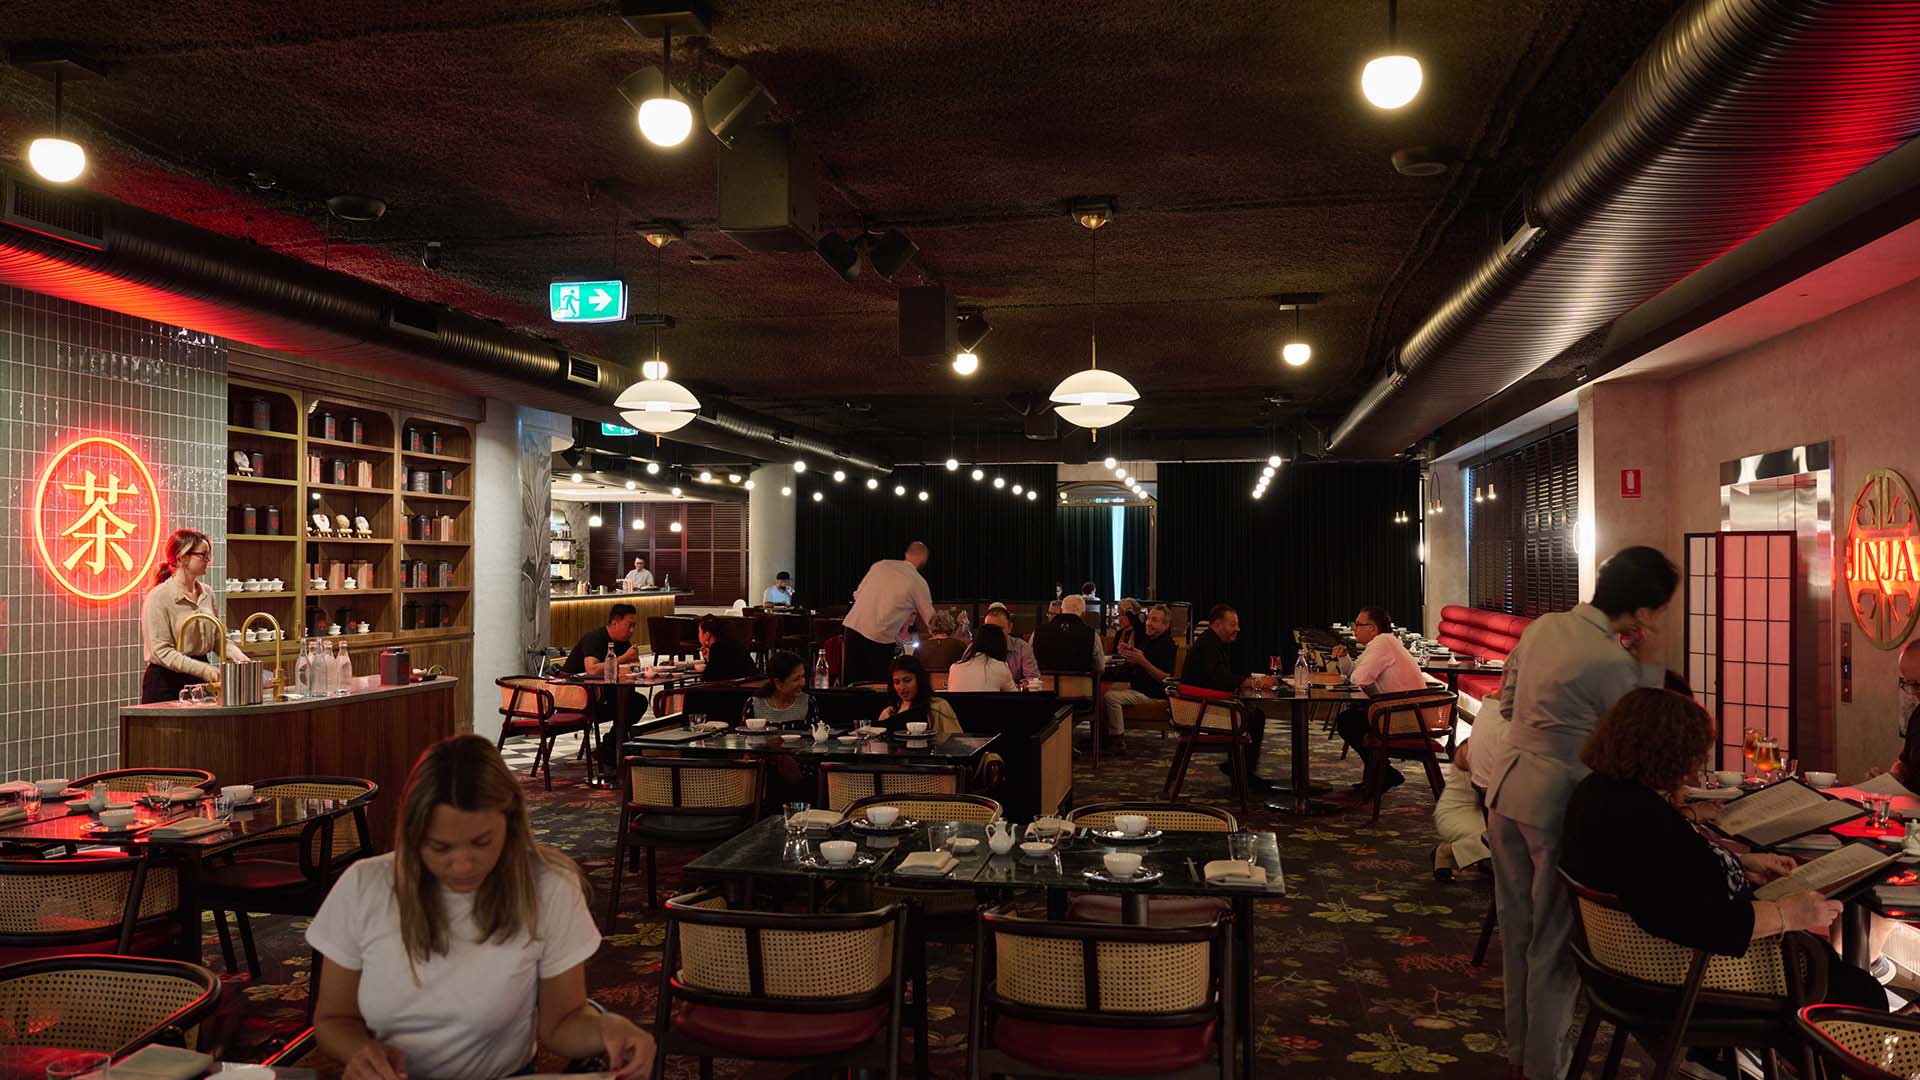 Macquarie Park's New Cantonese Restaurant JINJA Has Launched Yum Cha with Bottomless Tea